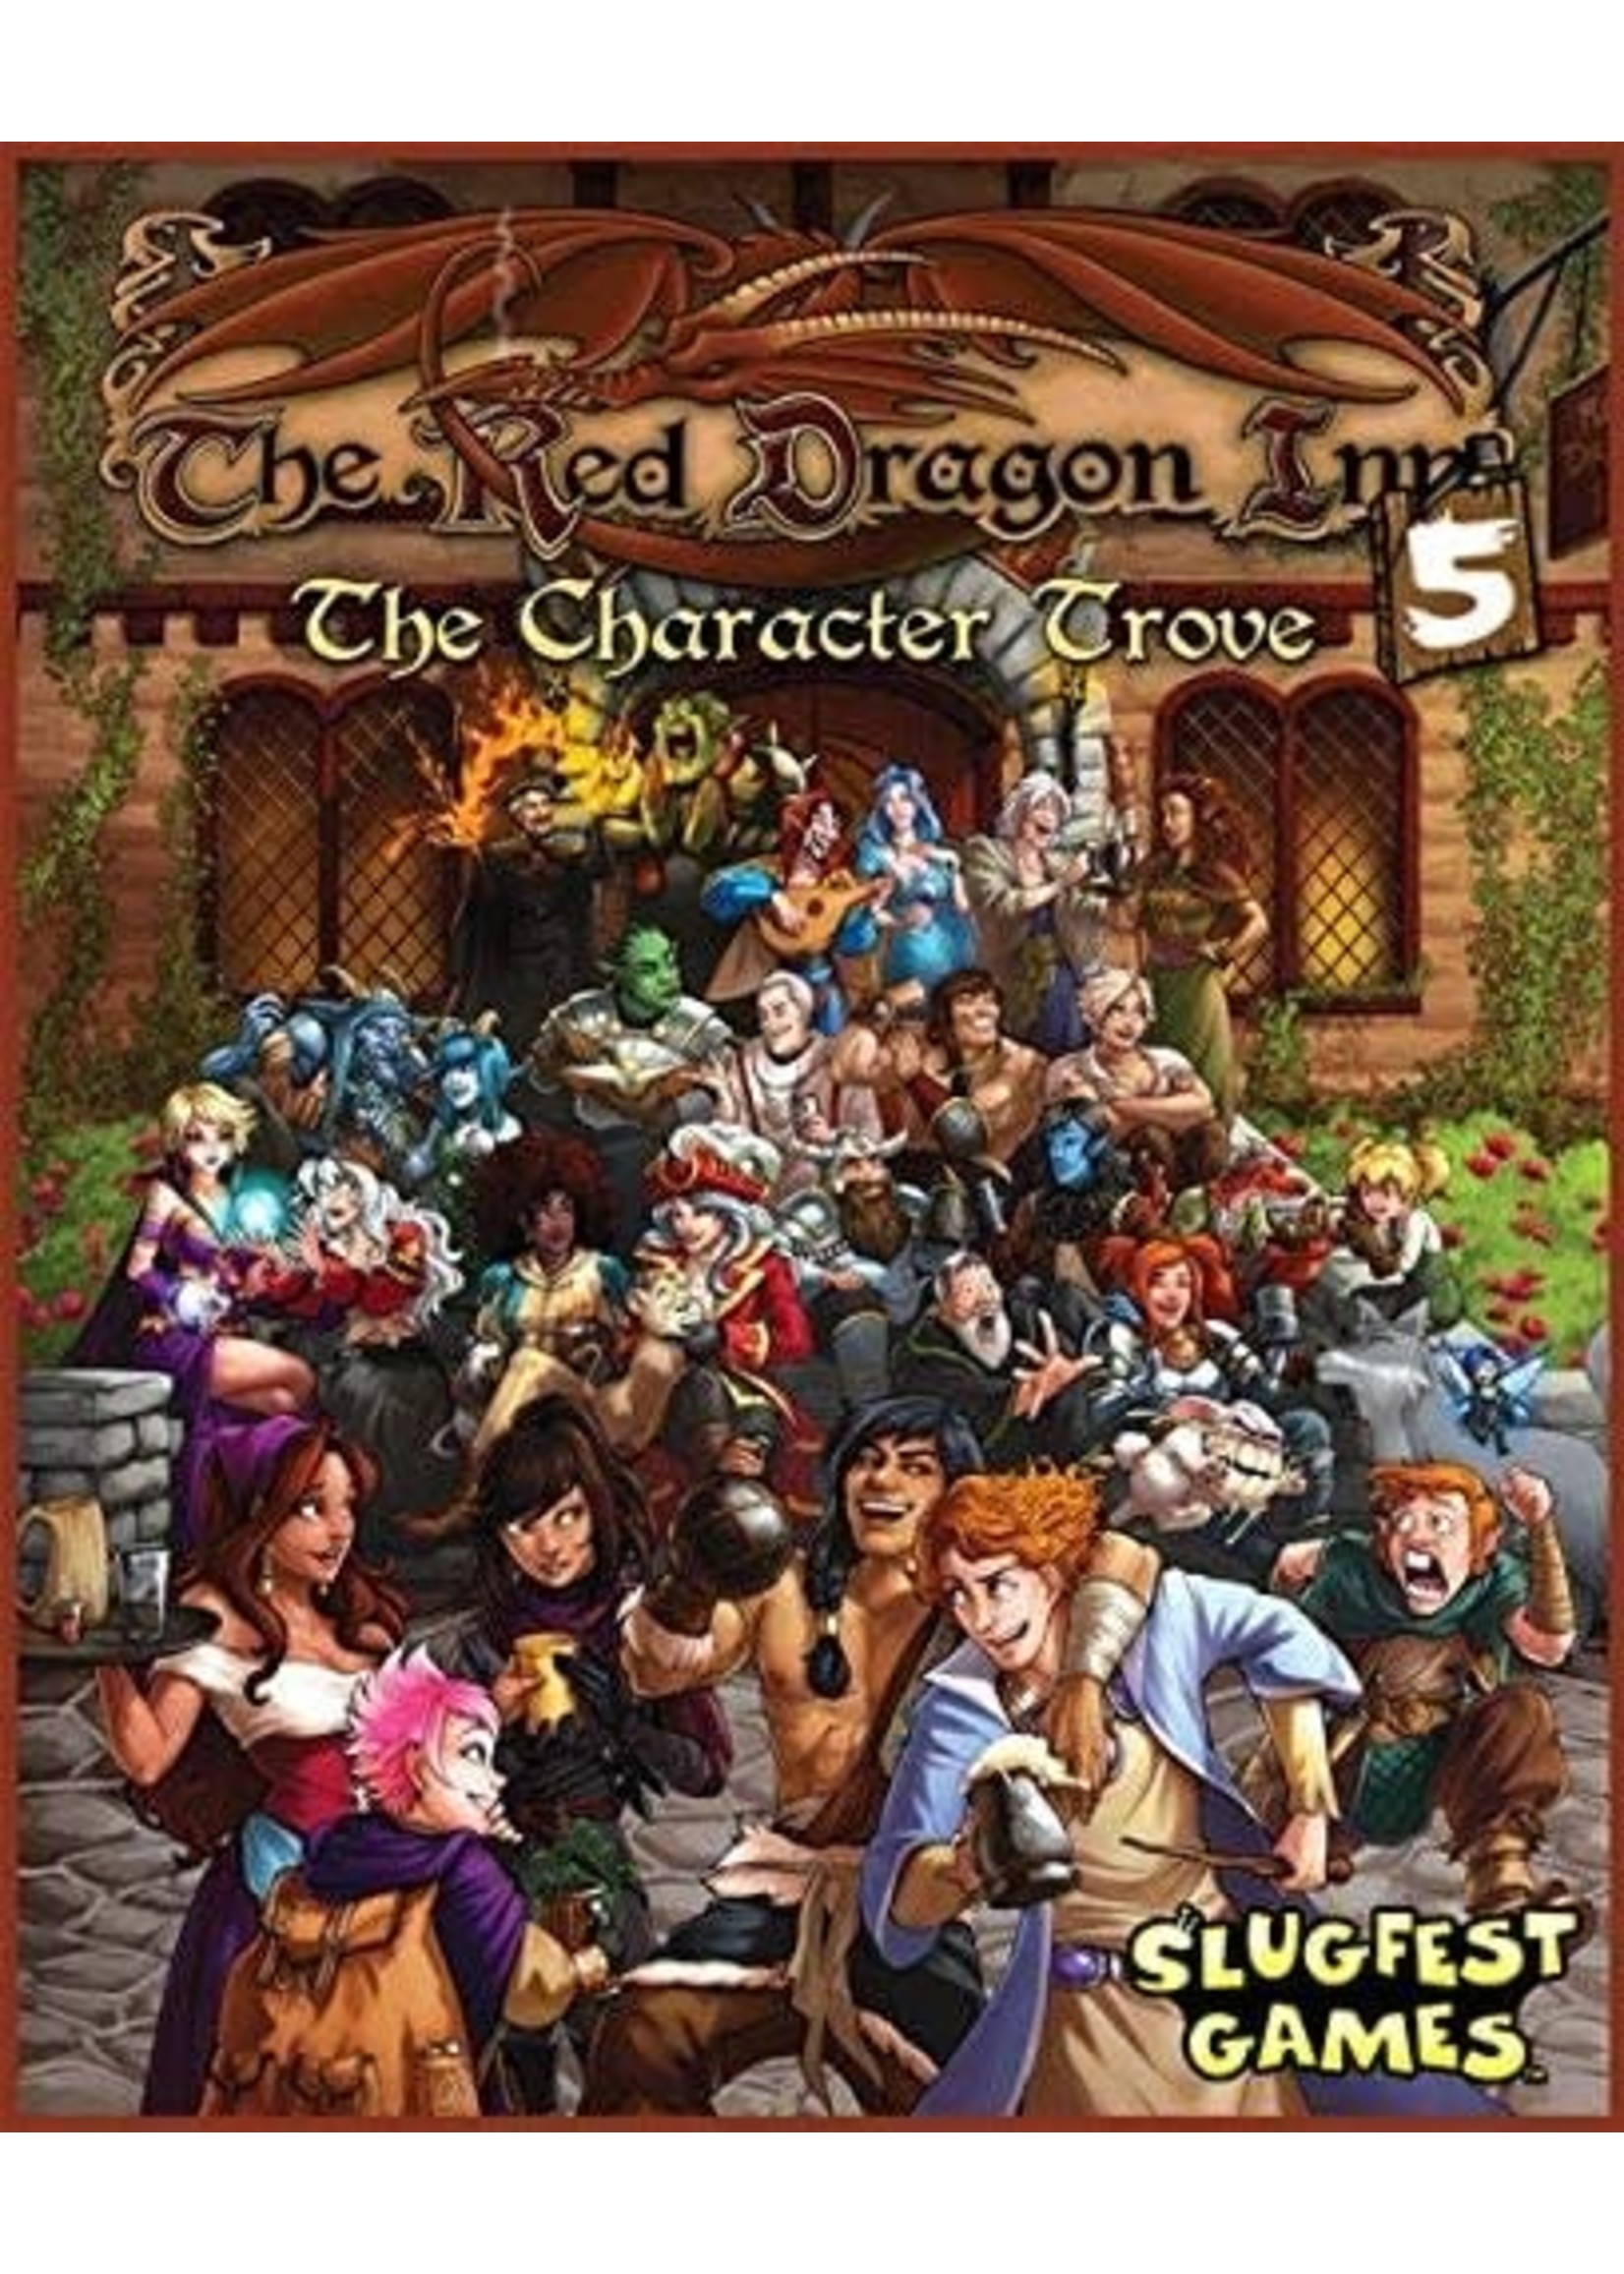 Slugfest Games The Red Dragon Inn 5: The Character Trove